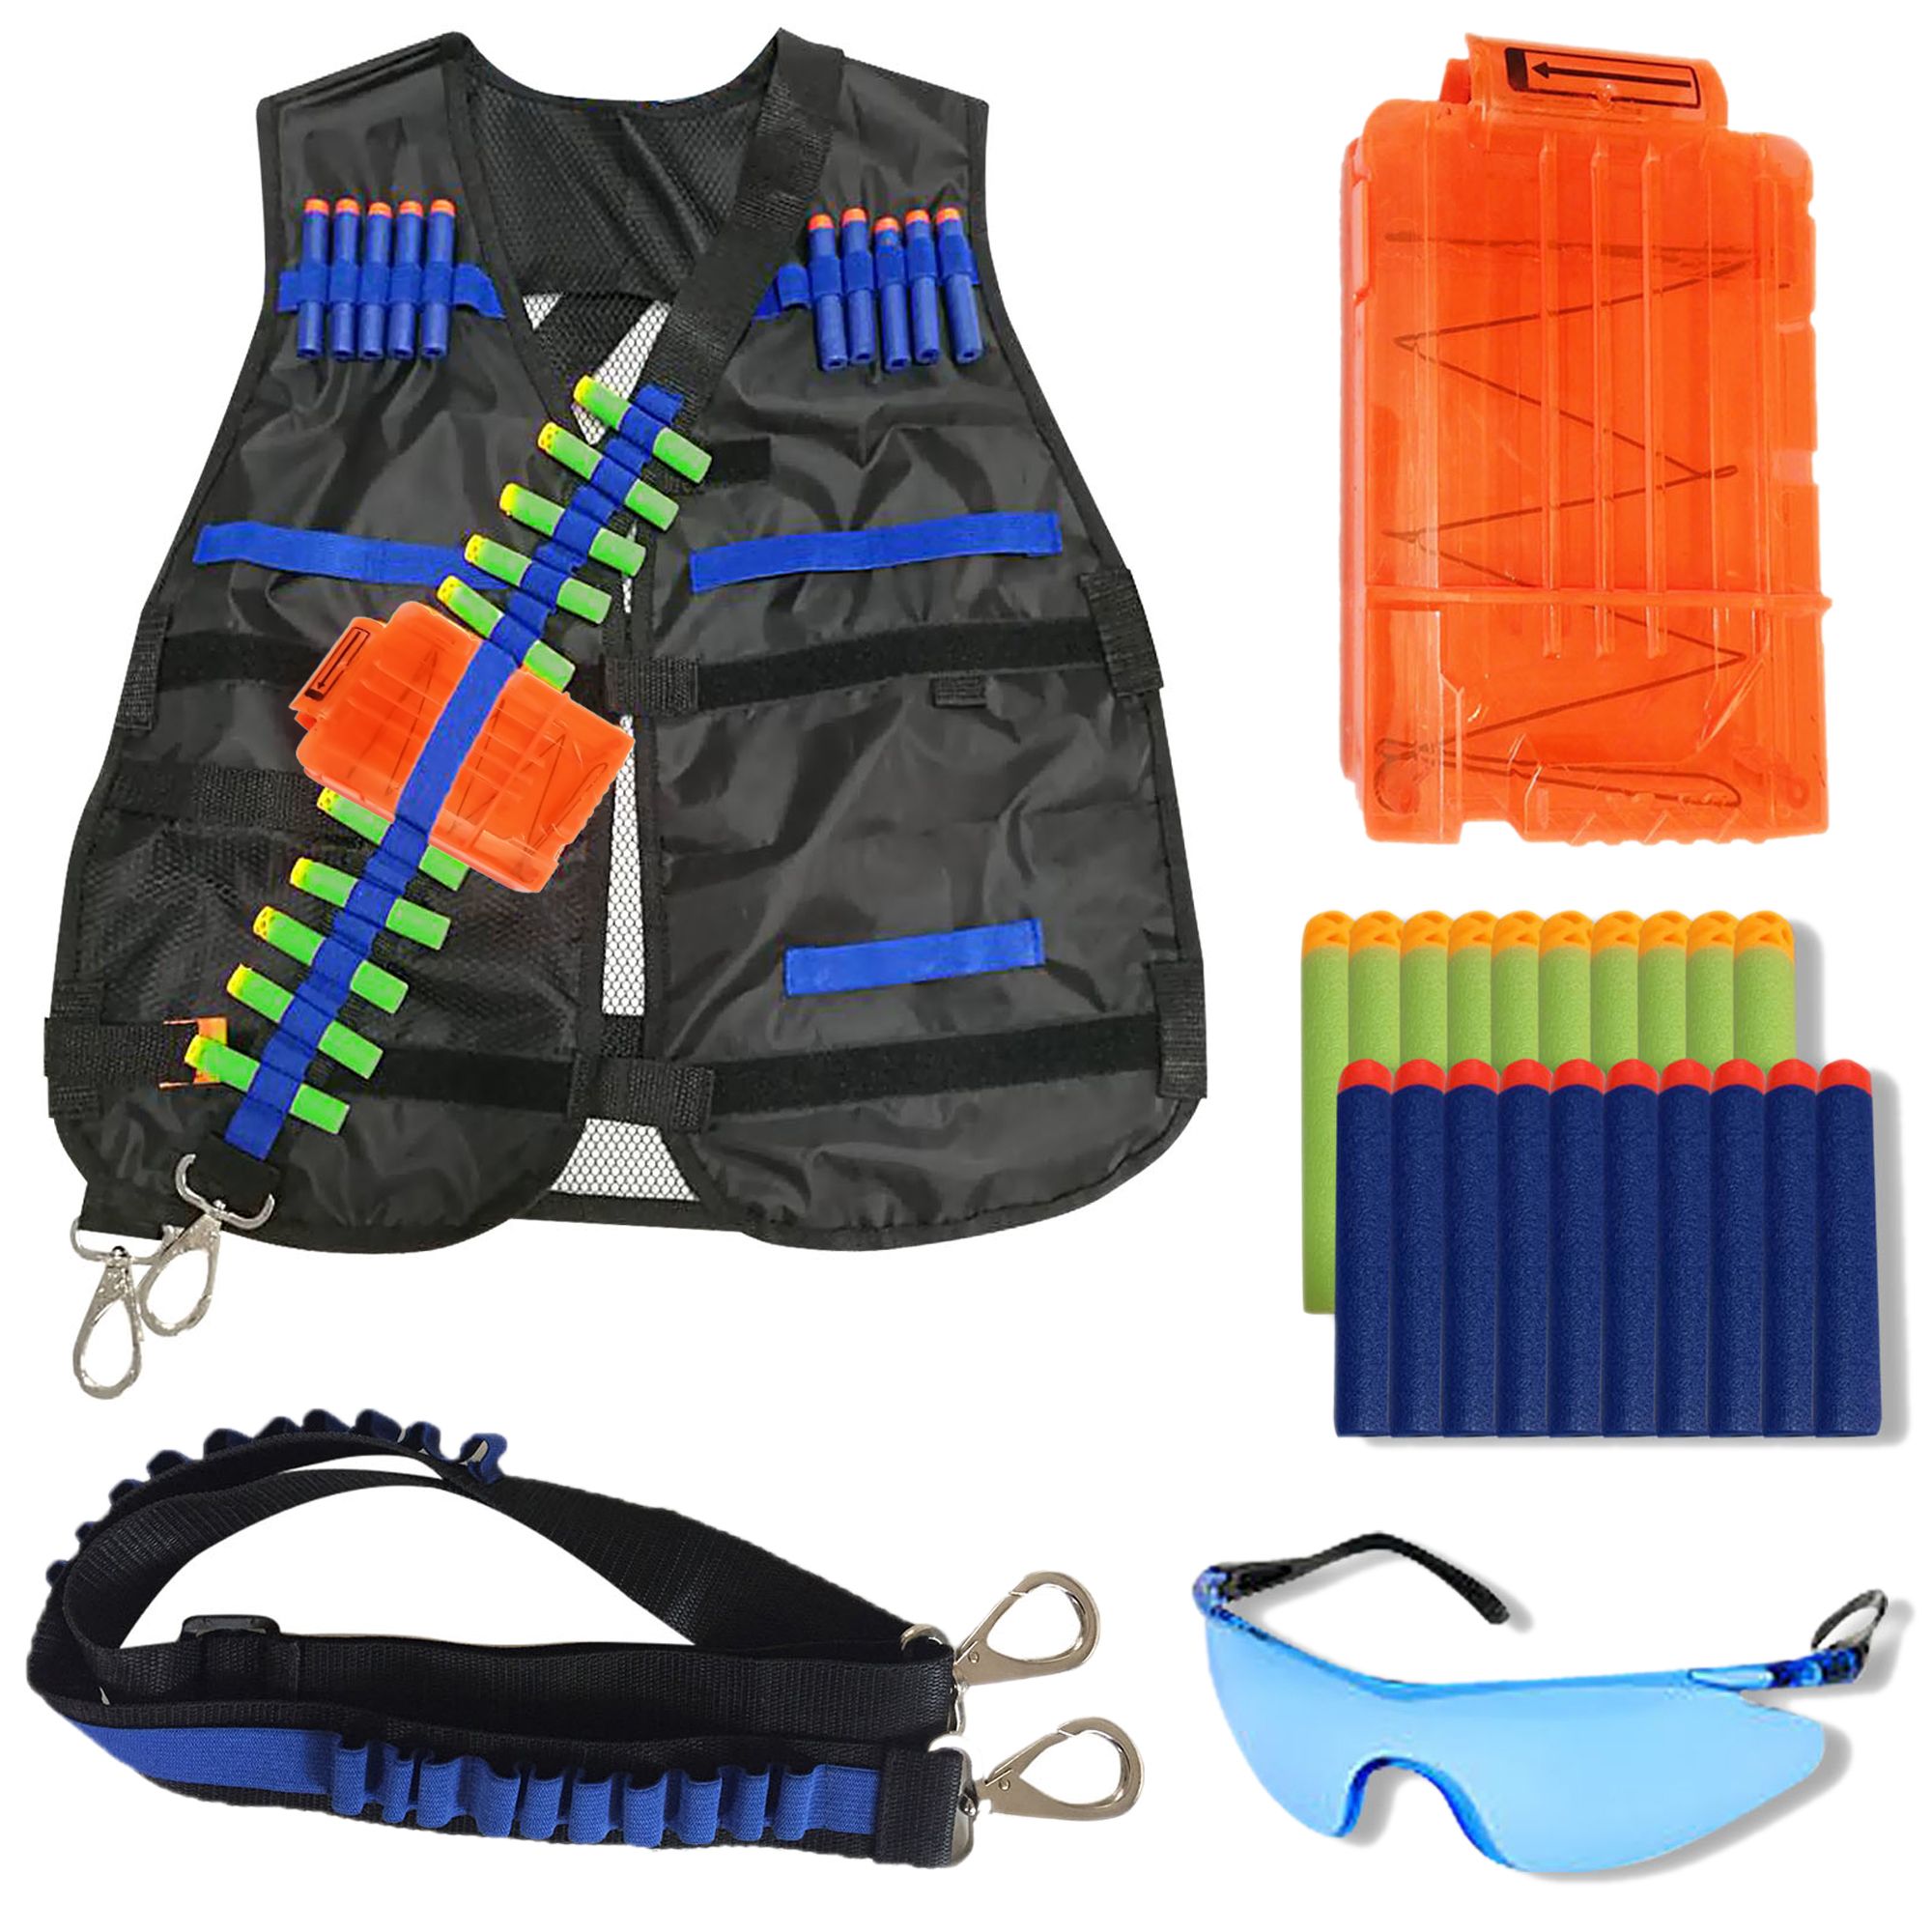 Wishery Nerf Guns Accessories for 1 Boy Tactical Vest Kit for Kids Compatible with N Strike Elite Series 20 Darts Vest Safety Eye Glasses Clip Bandolier - image 1 of 8